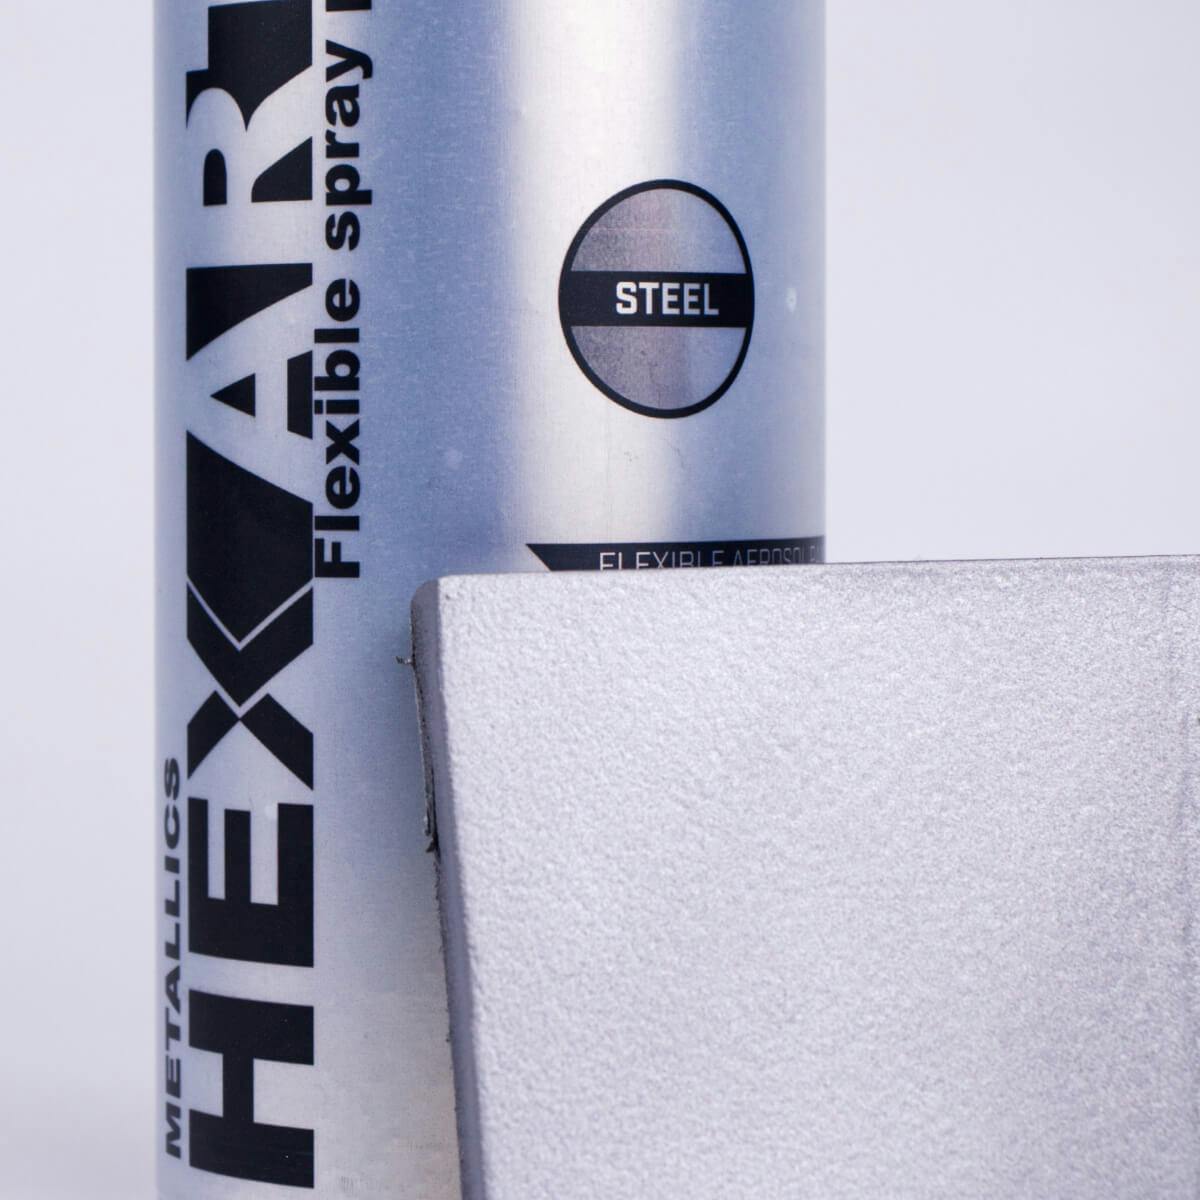 Container and sample of steel HexArt spray paint